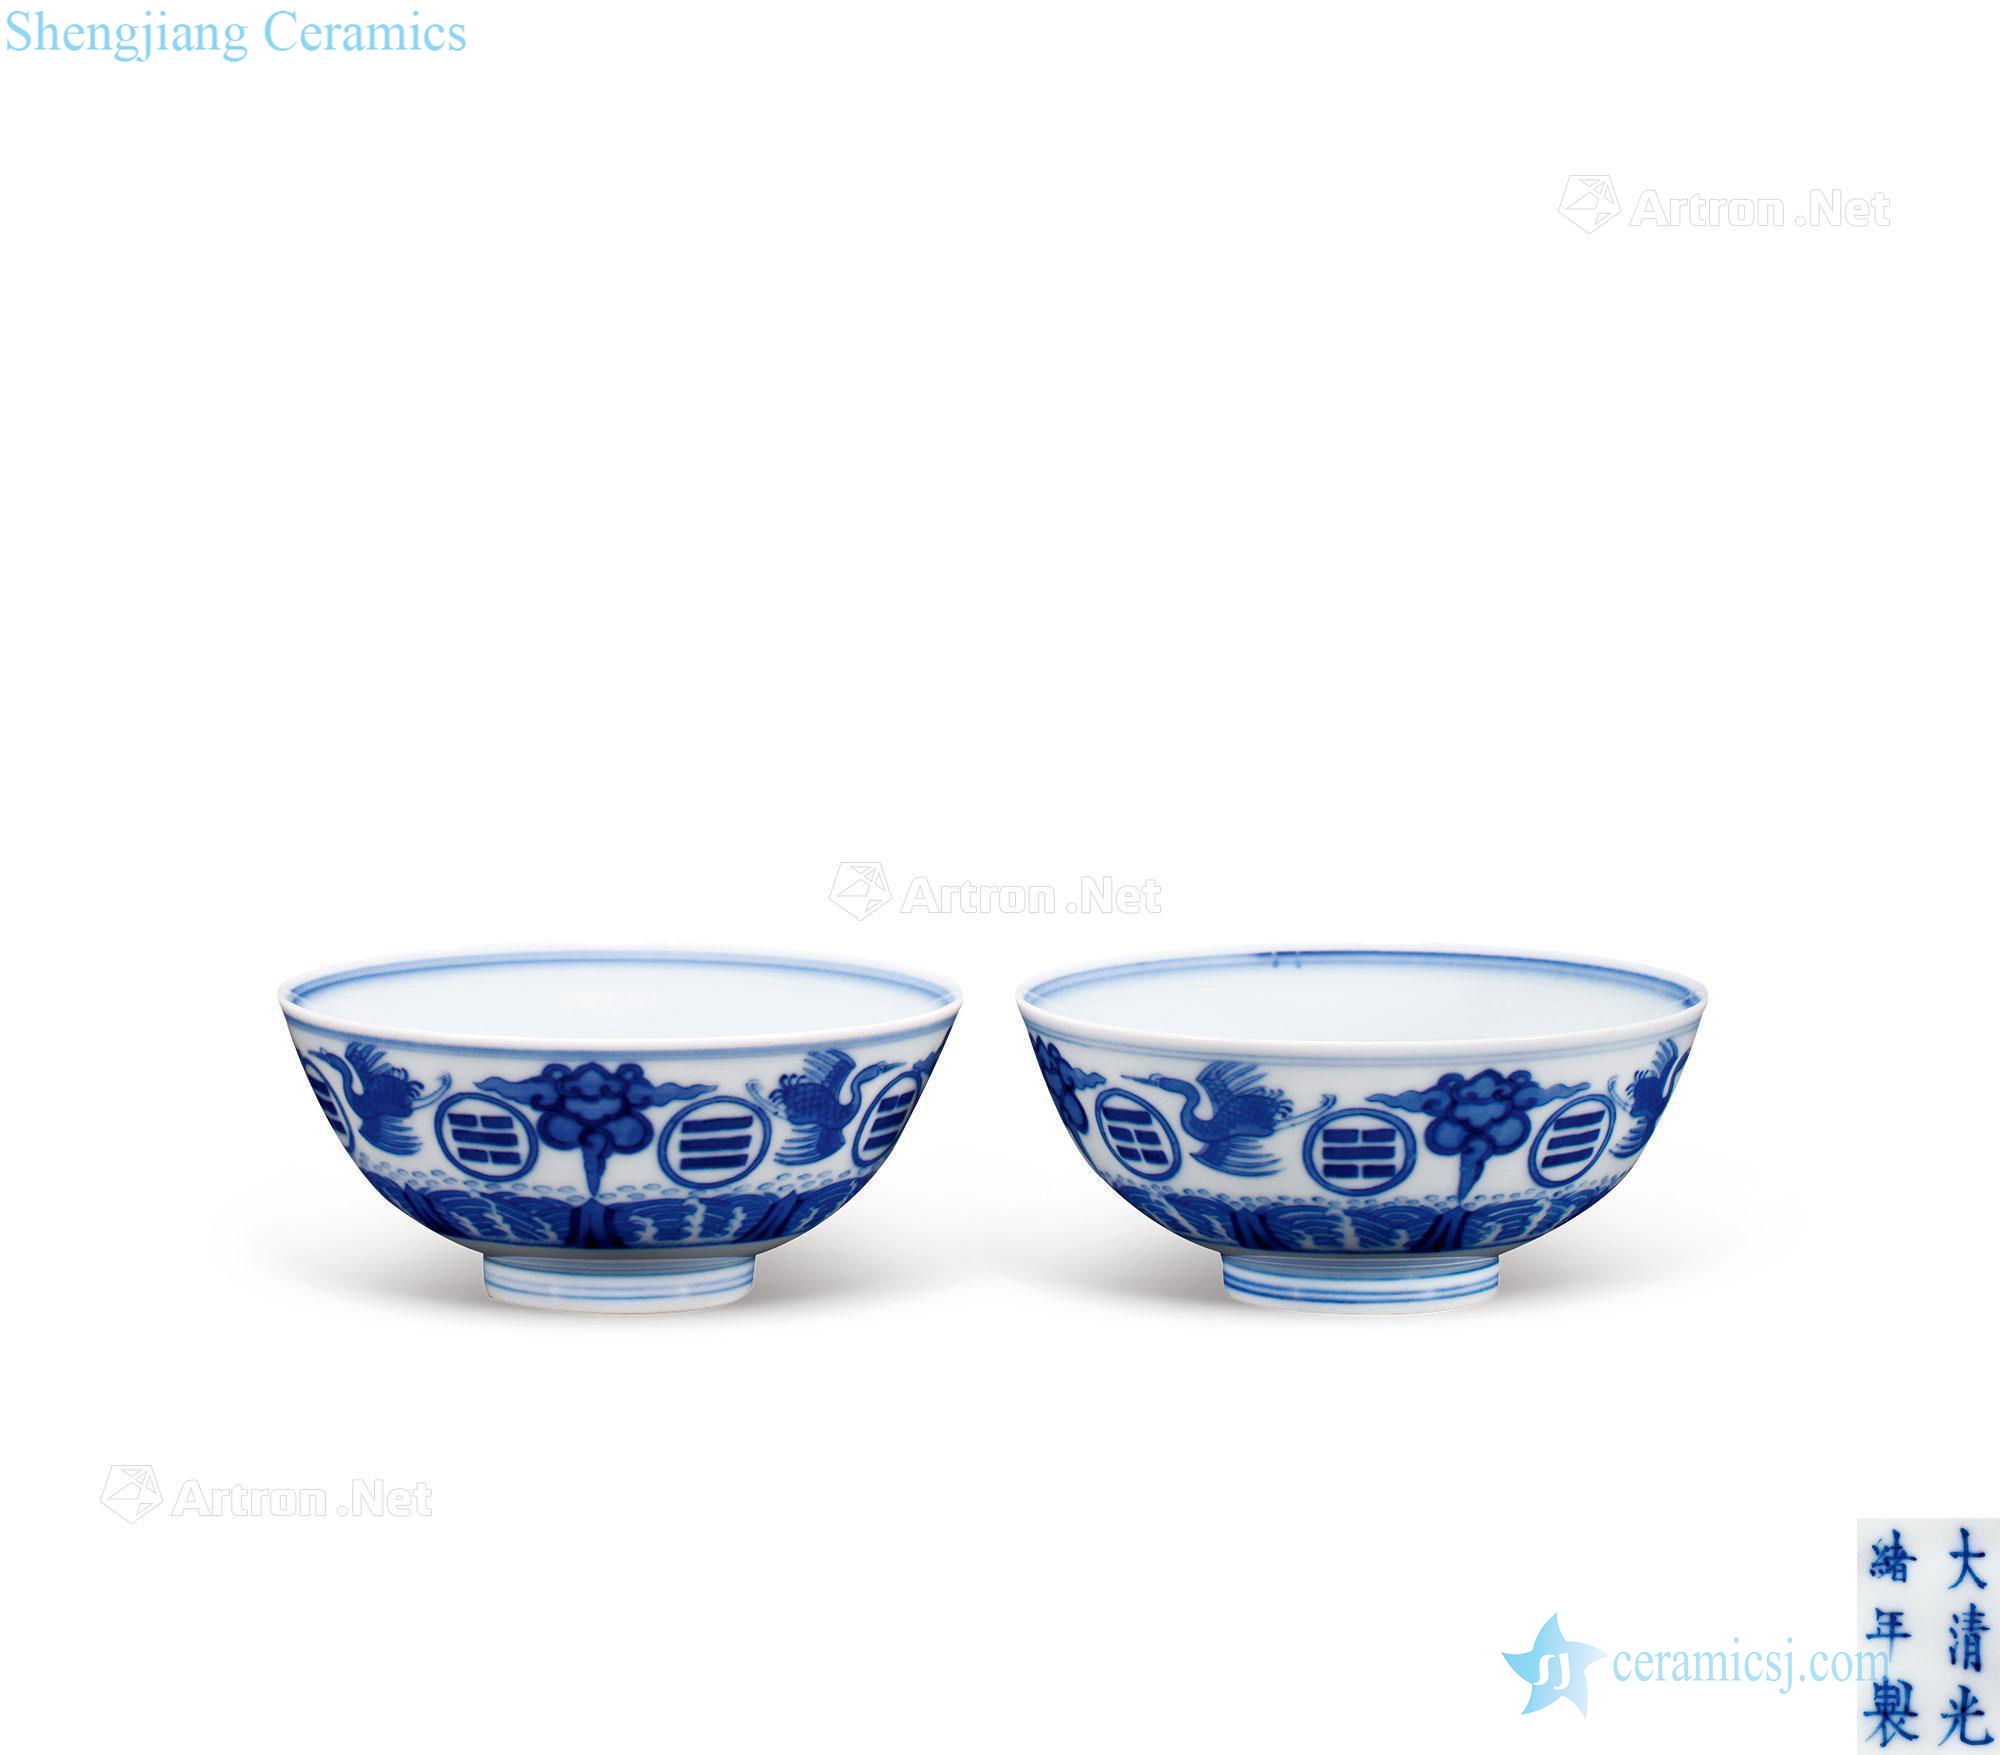 Qing guangxu Blue and white gossip James t. c. na was published grain small bowl (a)